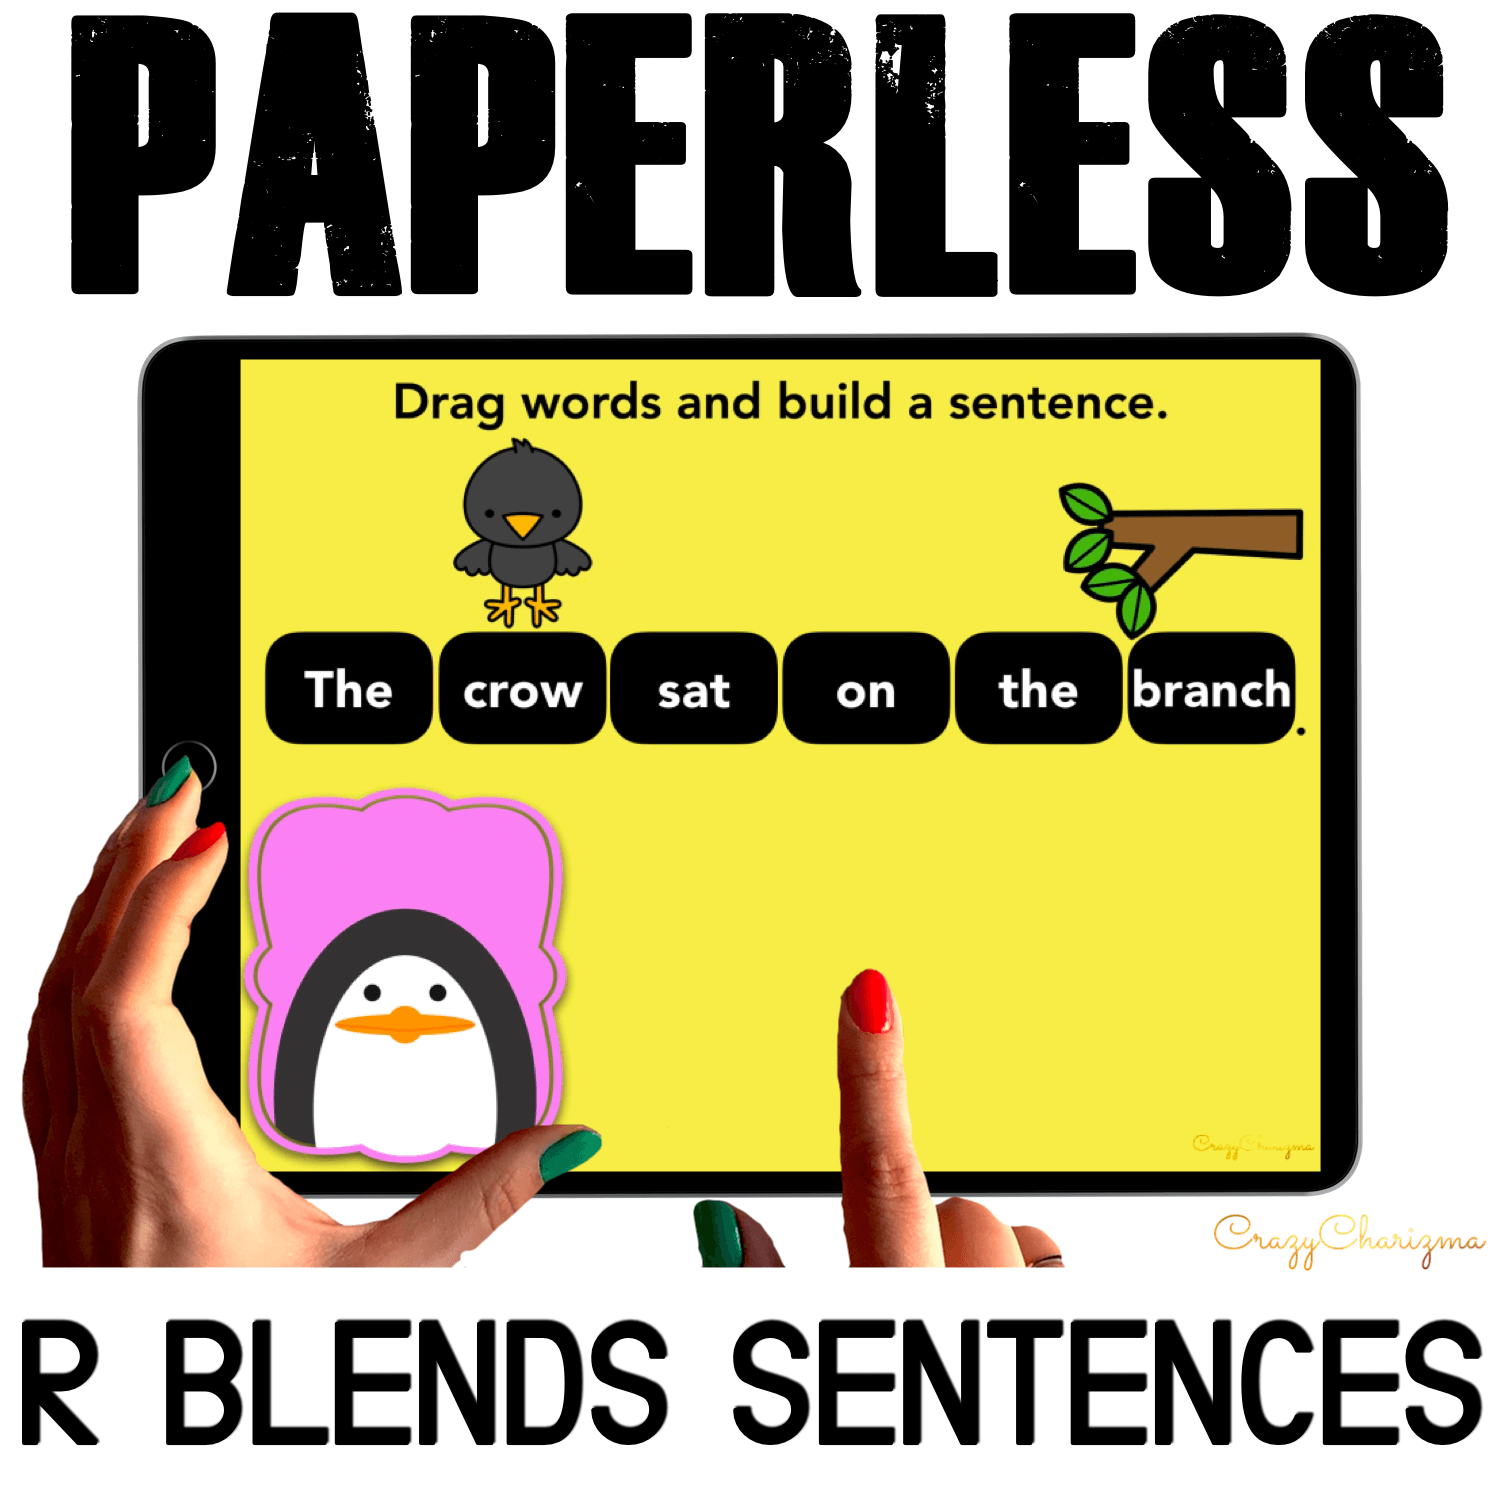 Need to practice beginning R BLENDS in sentences? Check out these interactive slides for Google Classroom. Kids will drag words and build sentences with animals!